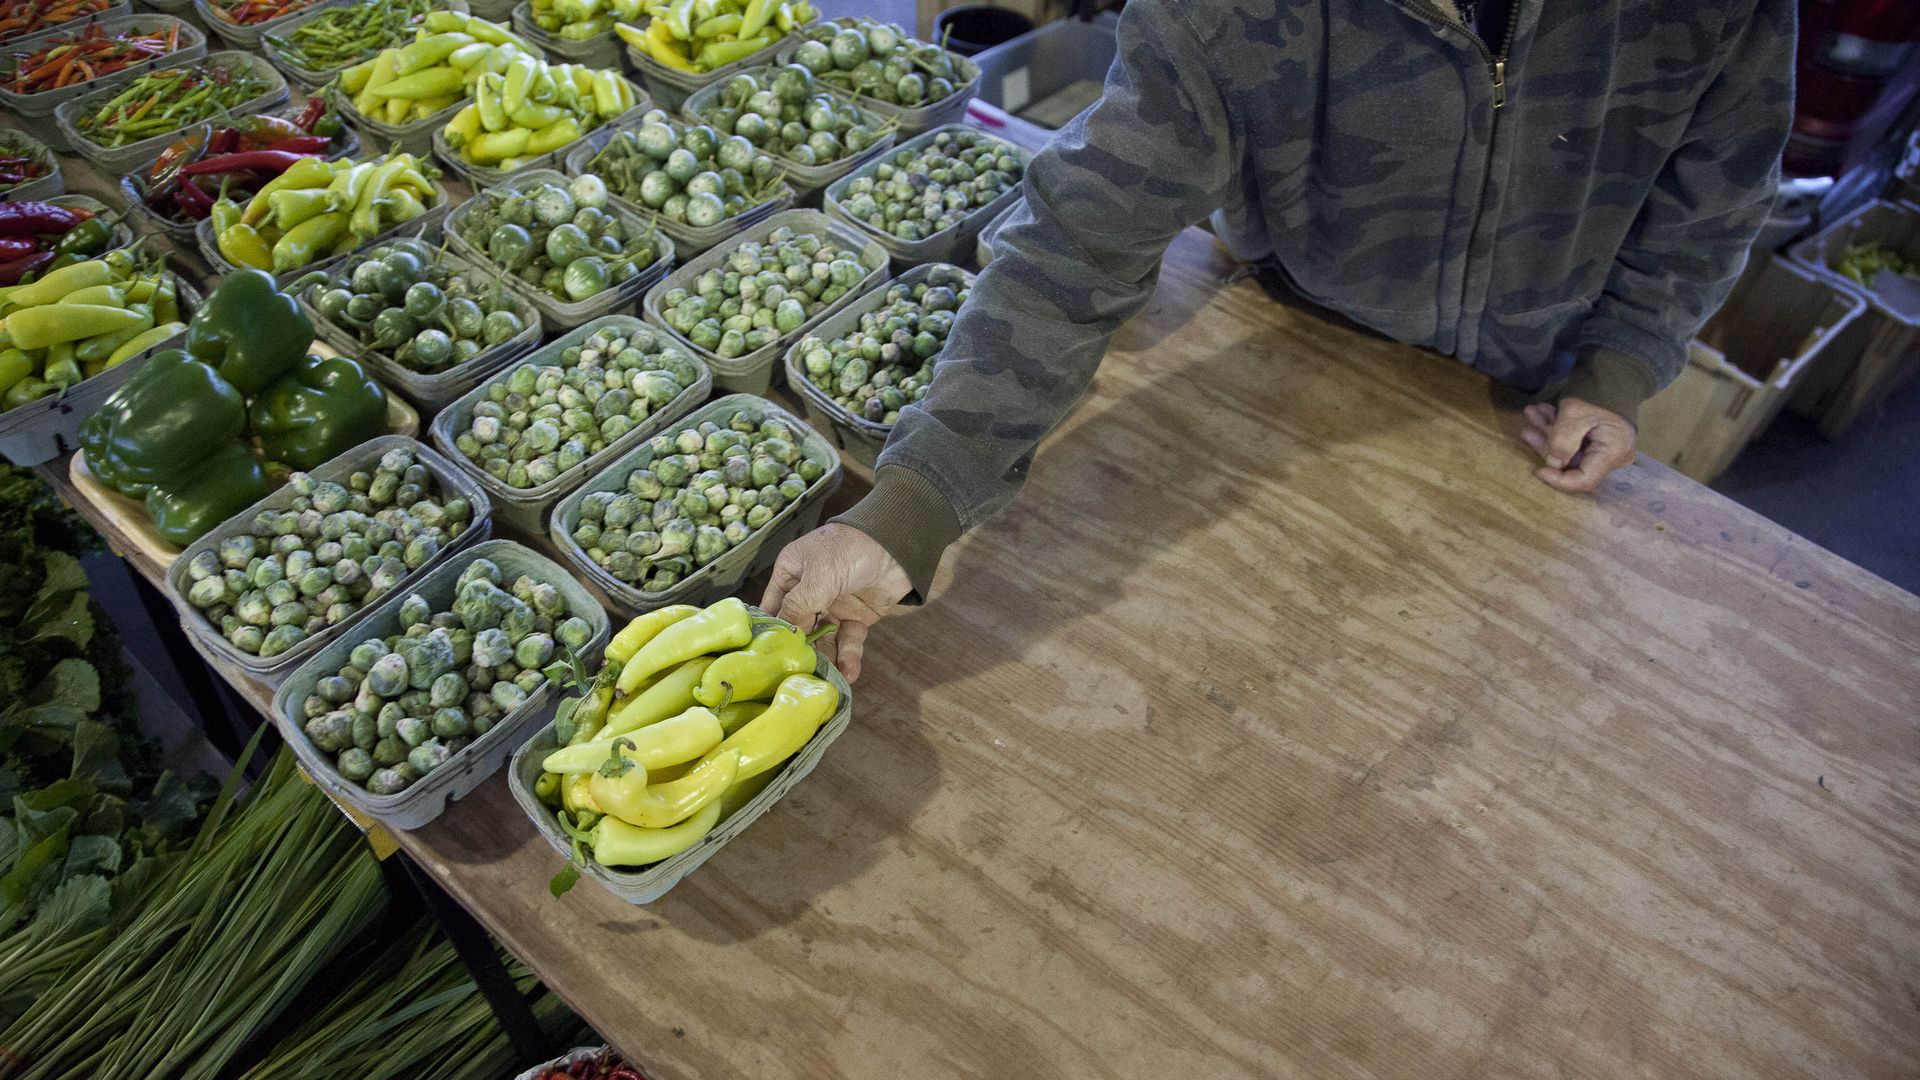 A person setting out produce onto a wooden table at a farmer's market.